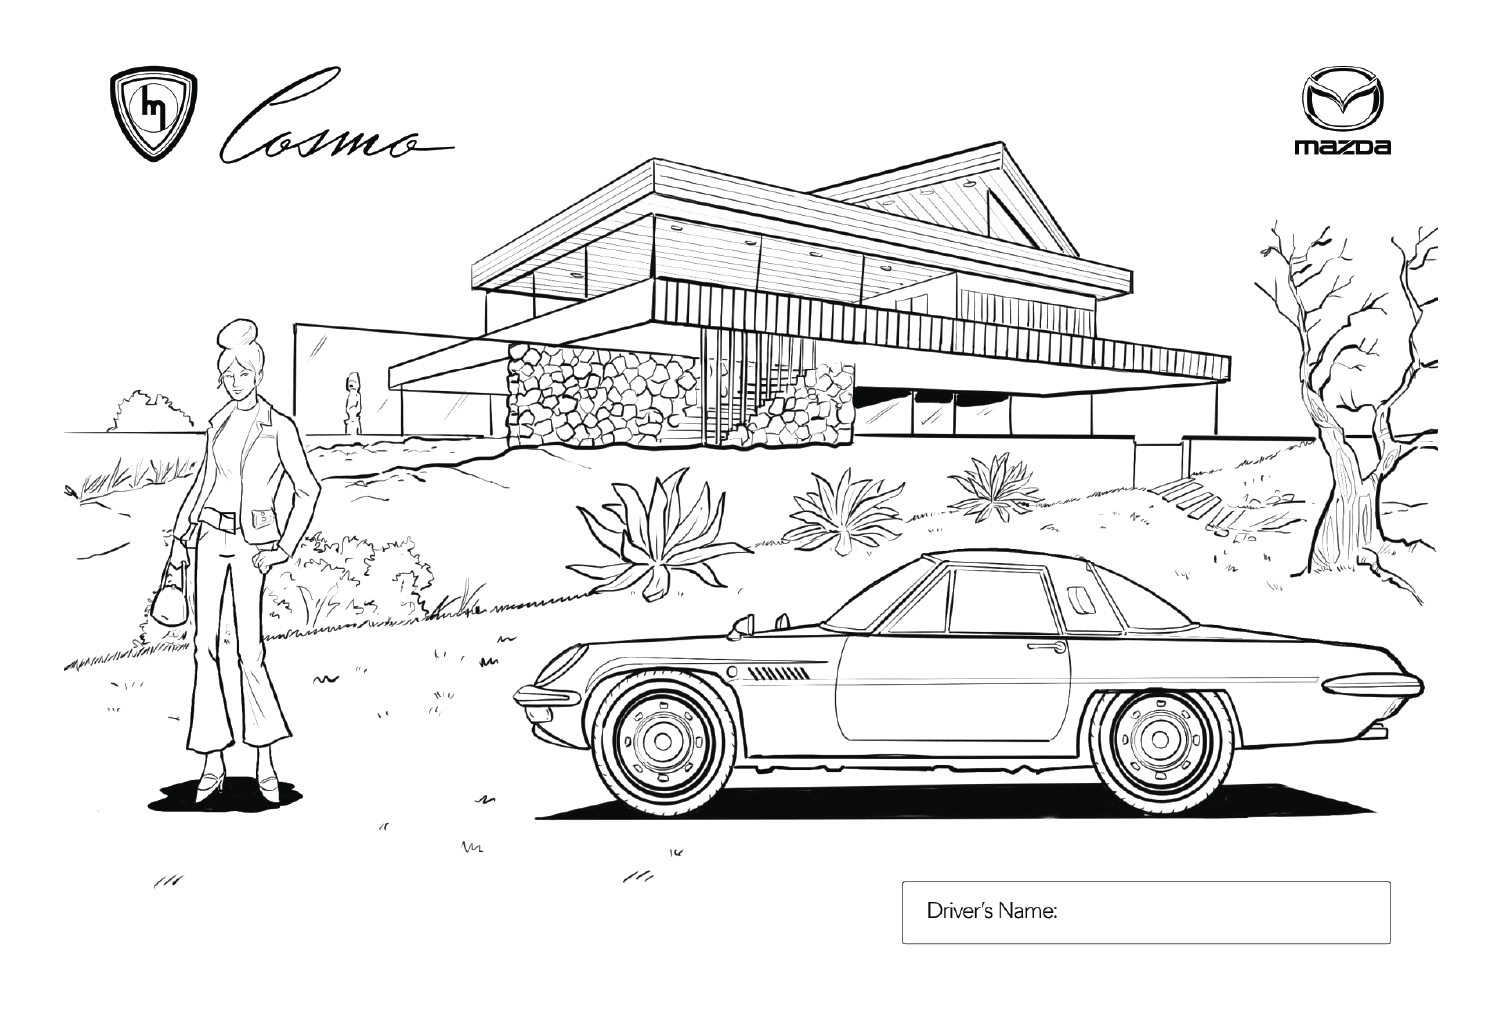 Mazda Cosmo Coloring Page from Mazda